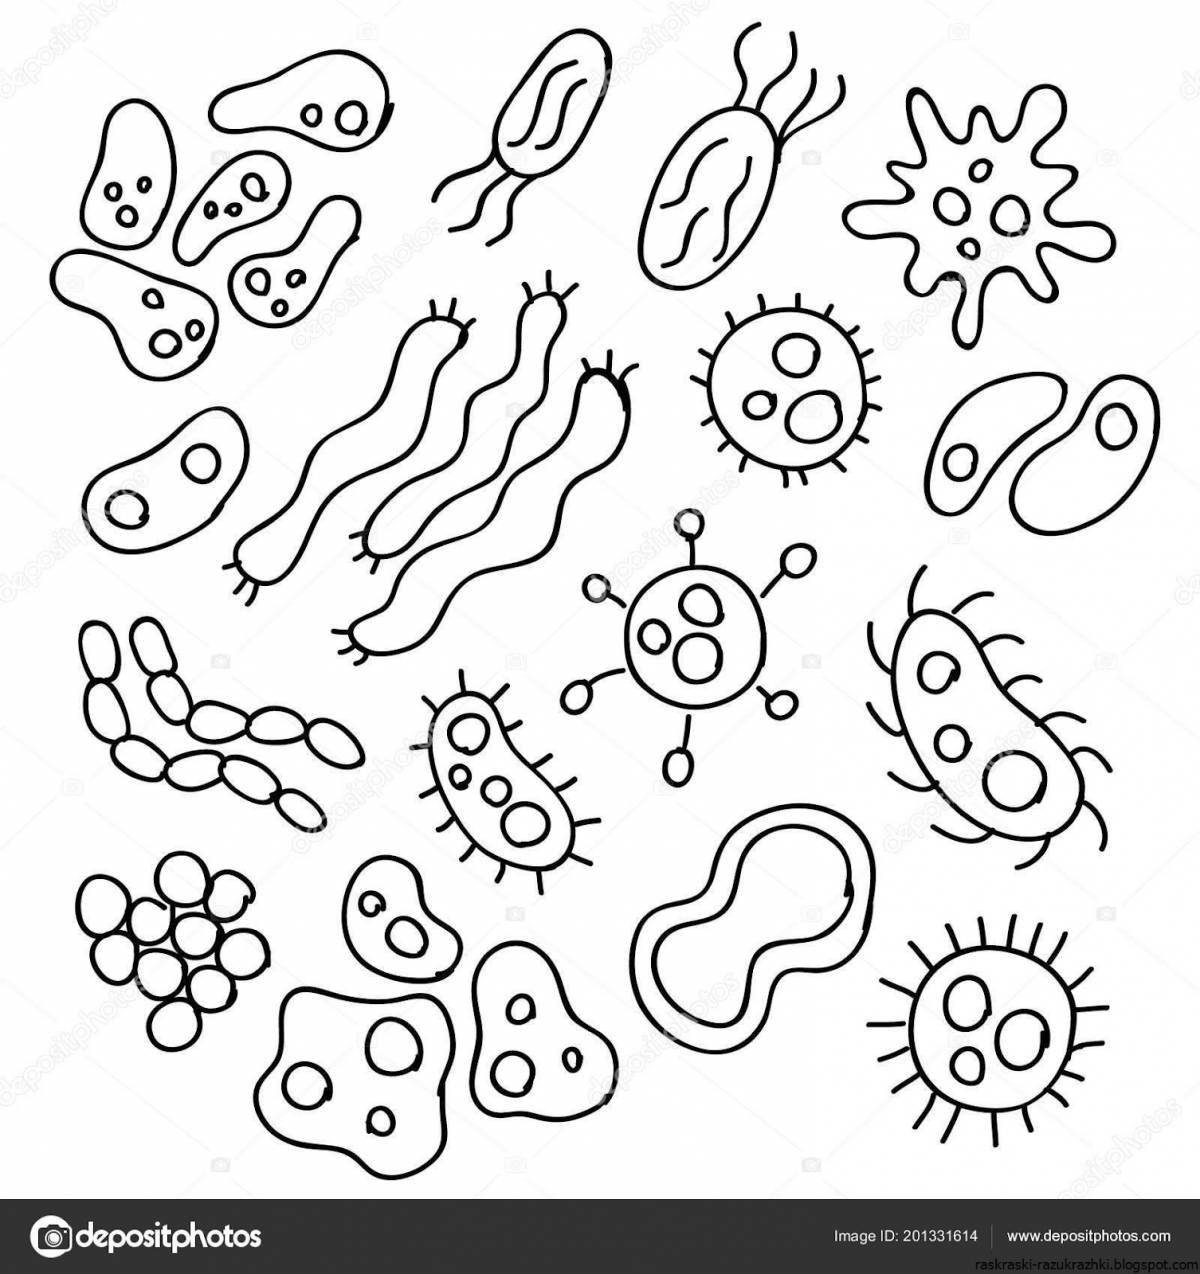 Fancy microbes coloring pages for kids